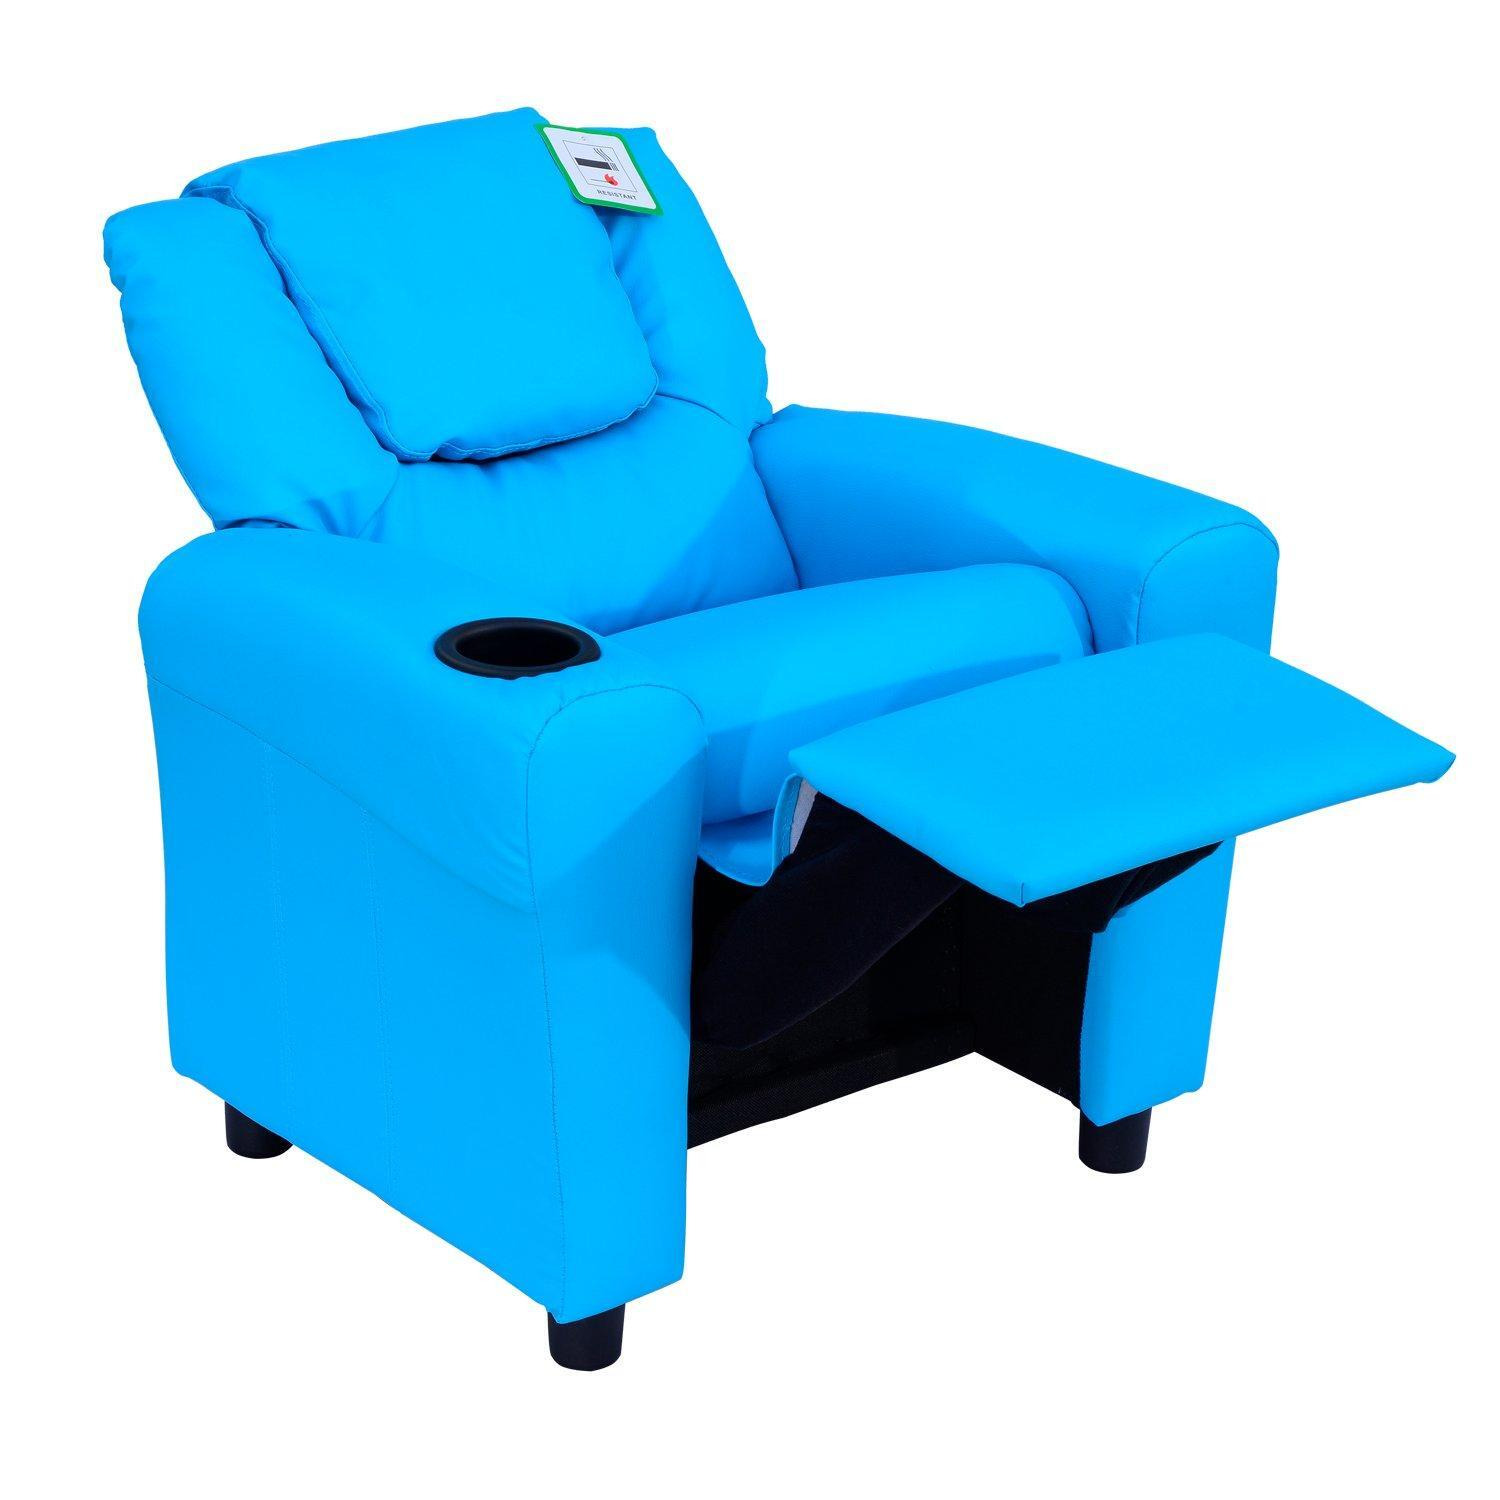 Recliner Armchair Games Chair Sofa Childrens Seat In PU Leather - image 1